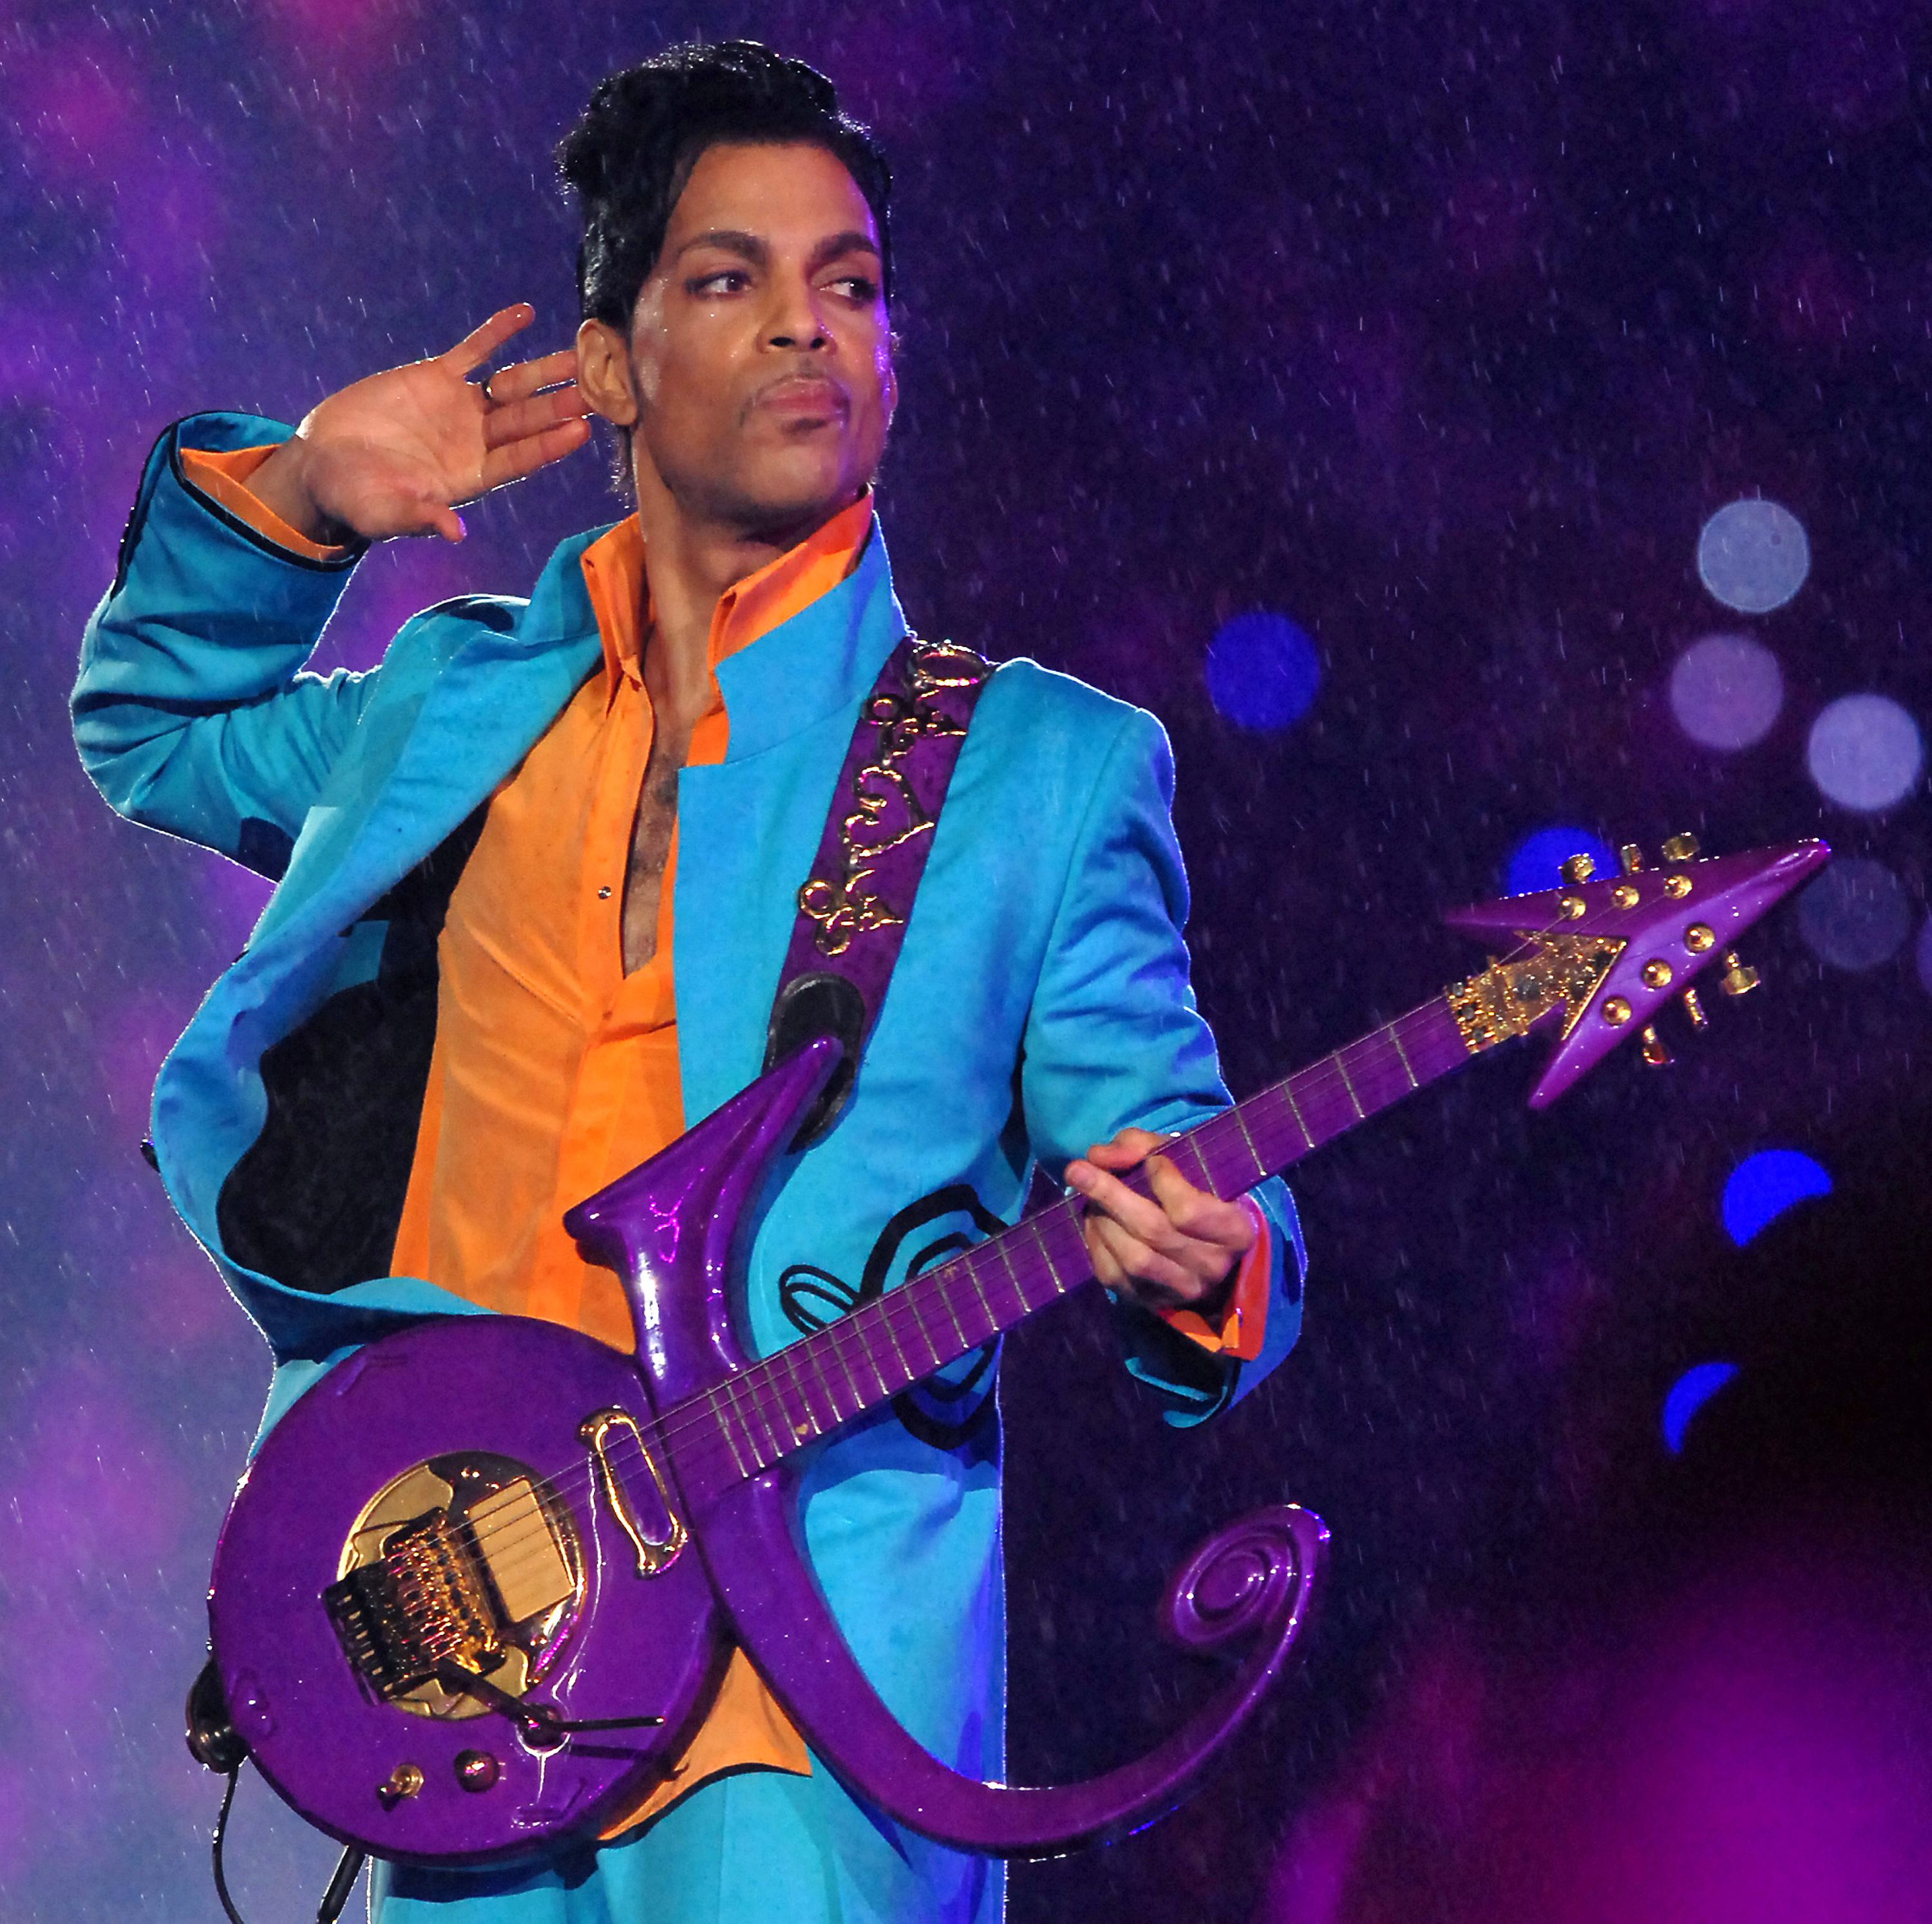 Prince performs at half time during Super Bowl XLI on February 4, 2007 in Miami, Florida | Source: Getty Images